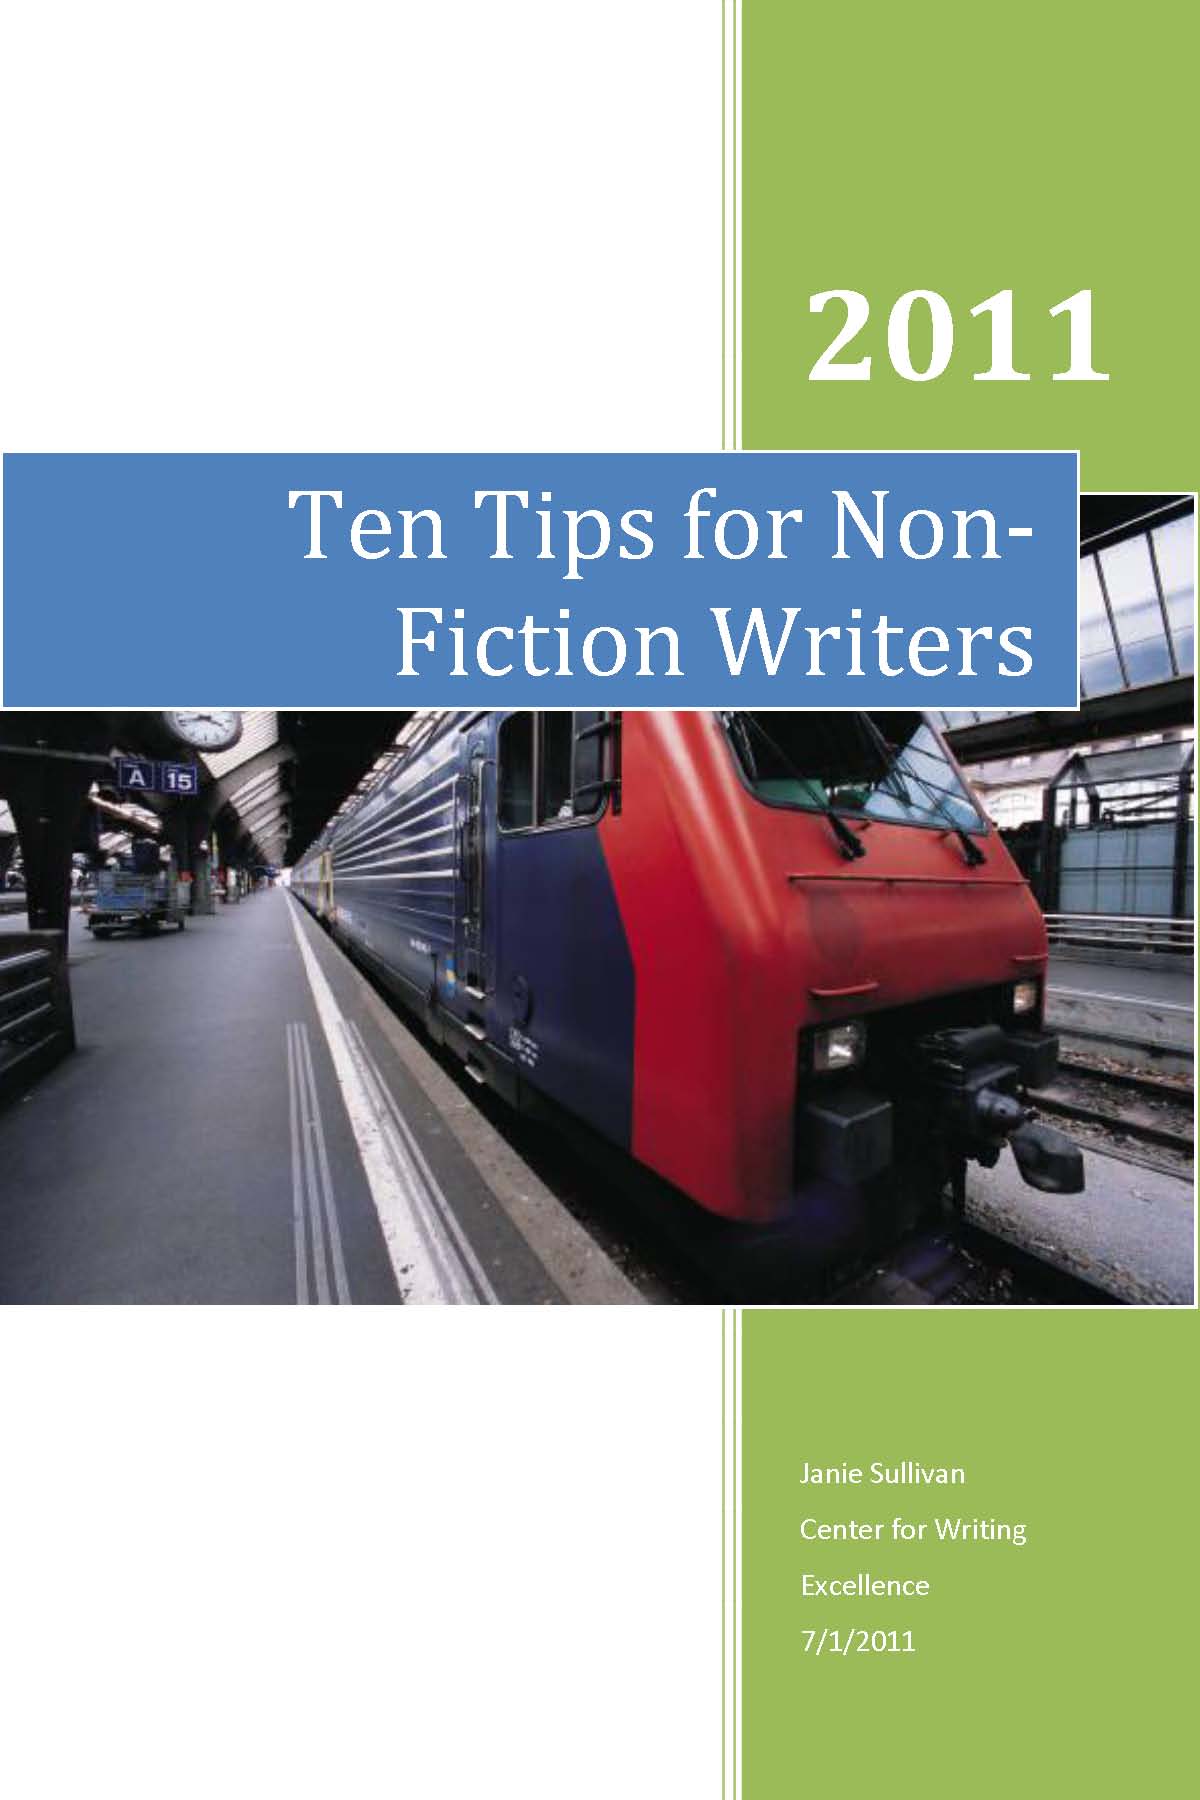 I have taken all the posts from the Ten Tips for Non-Fiction Writers,